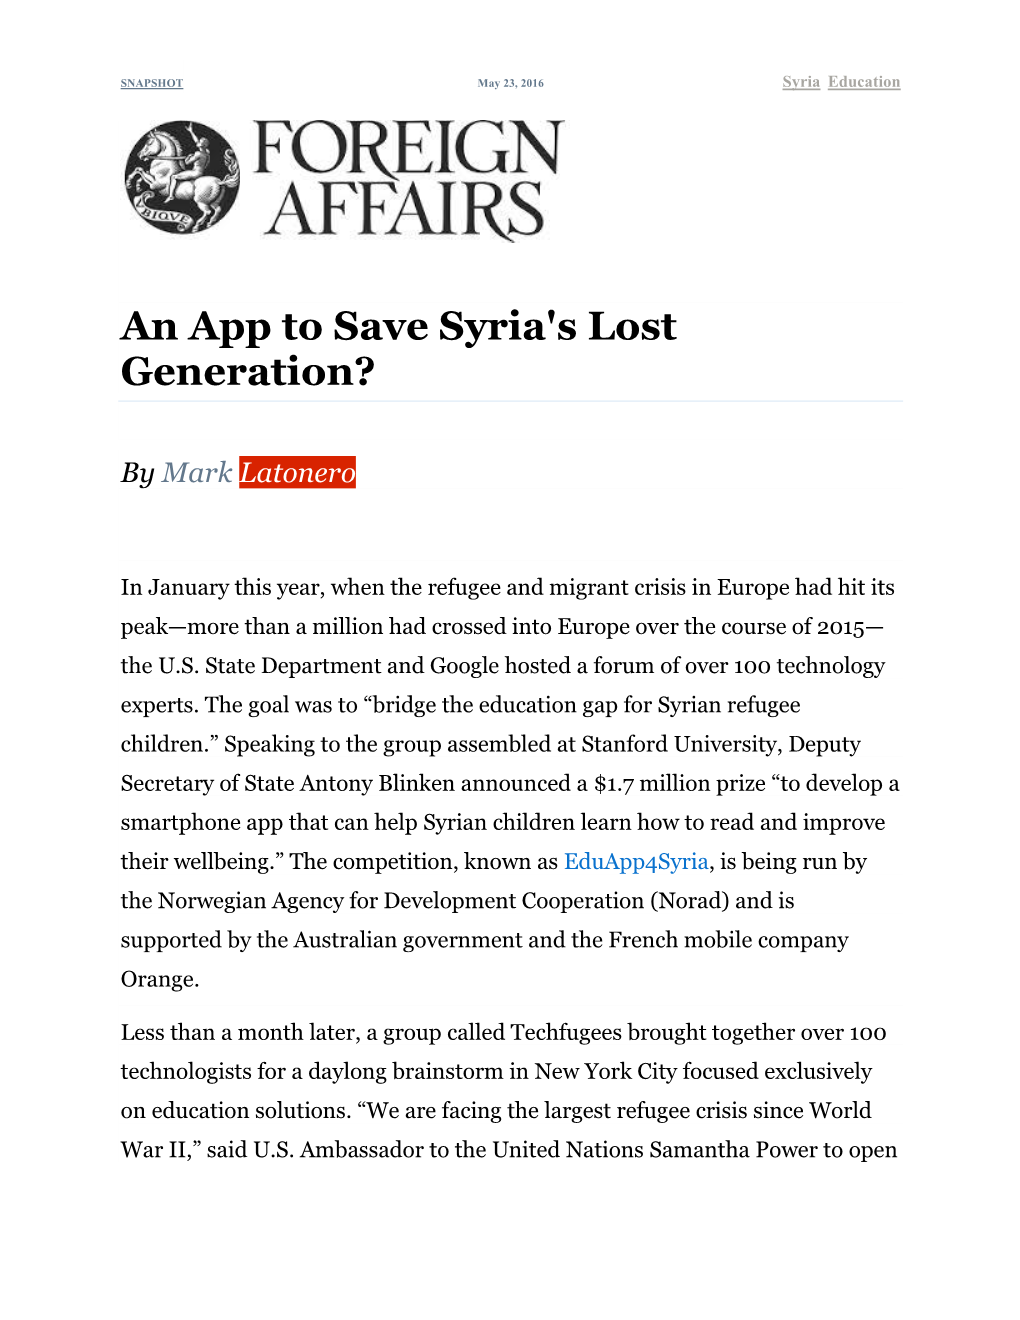 An App to Save Syria's Lost Generation?